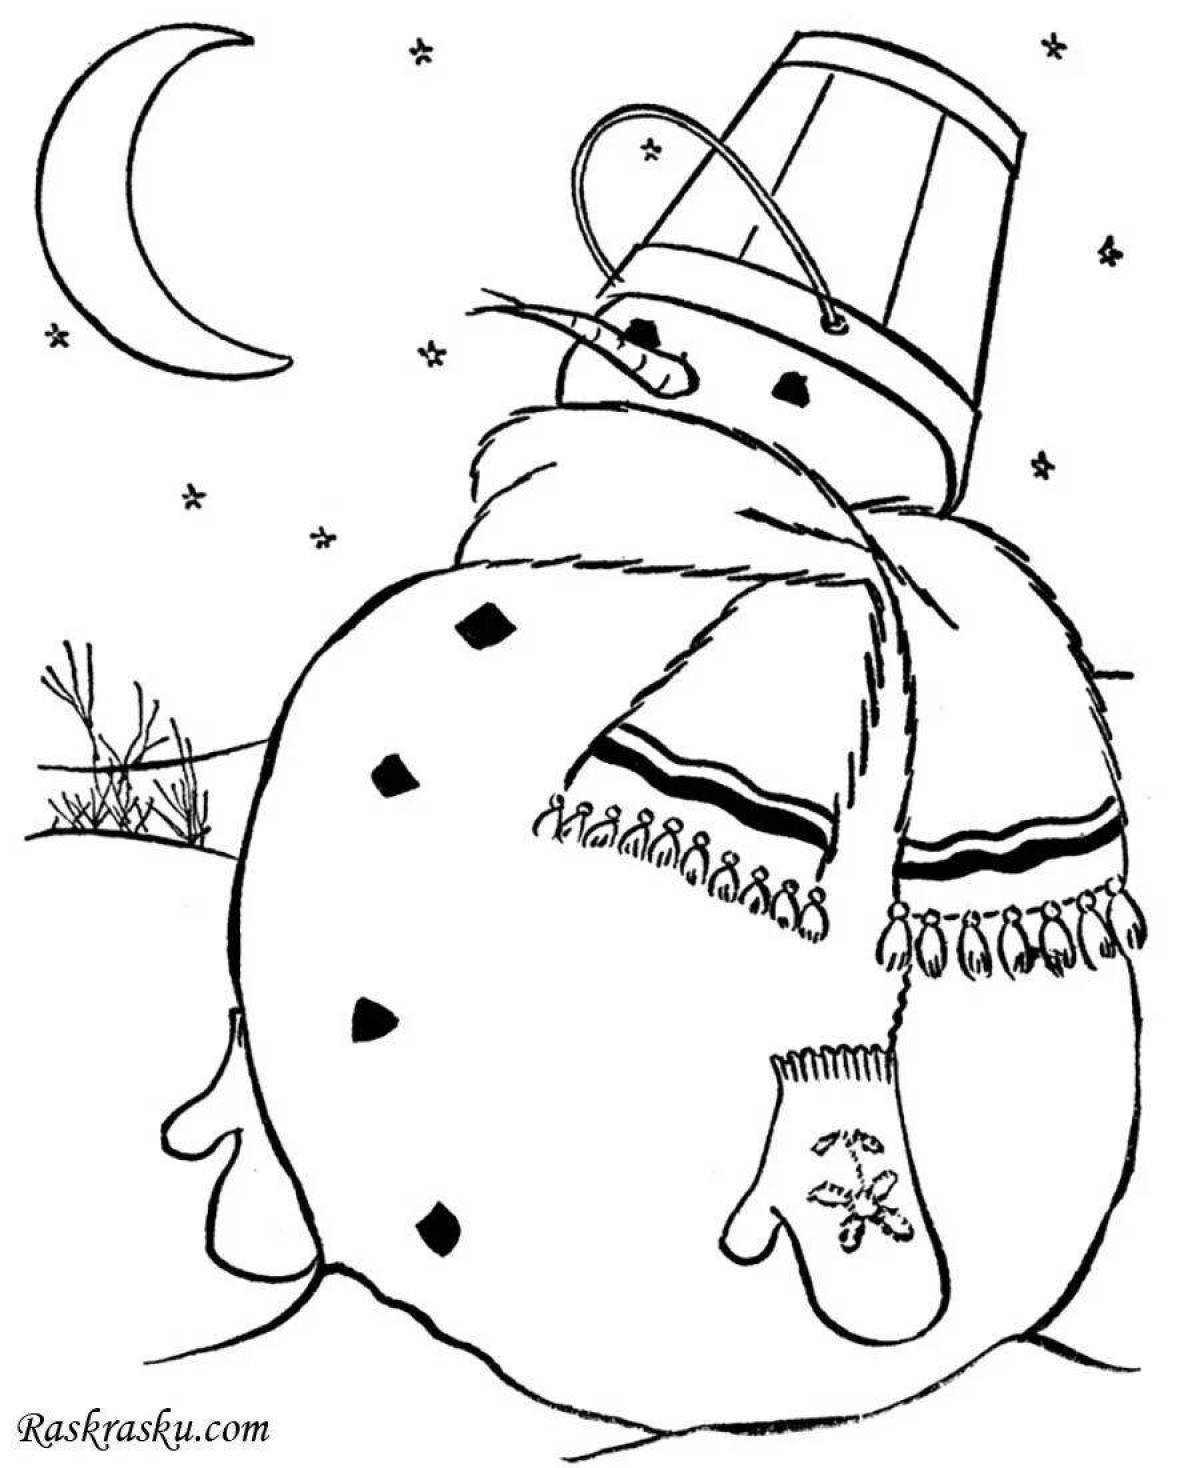 Awesome Christmas snowman coloring book